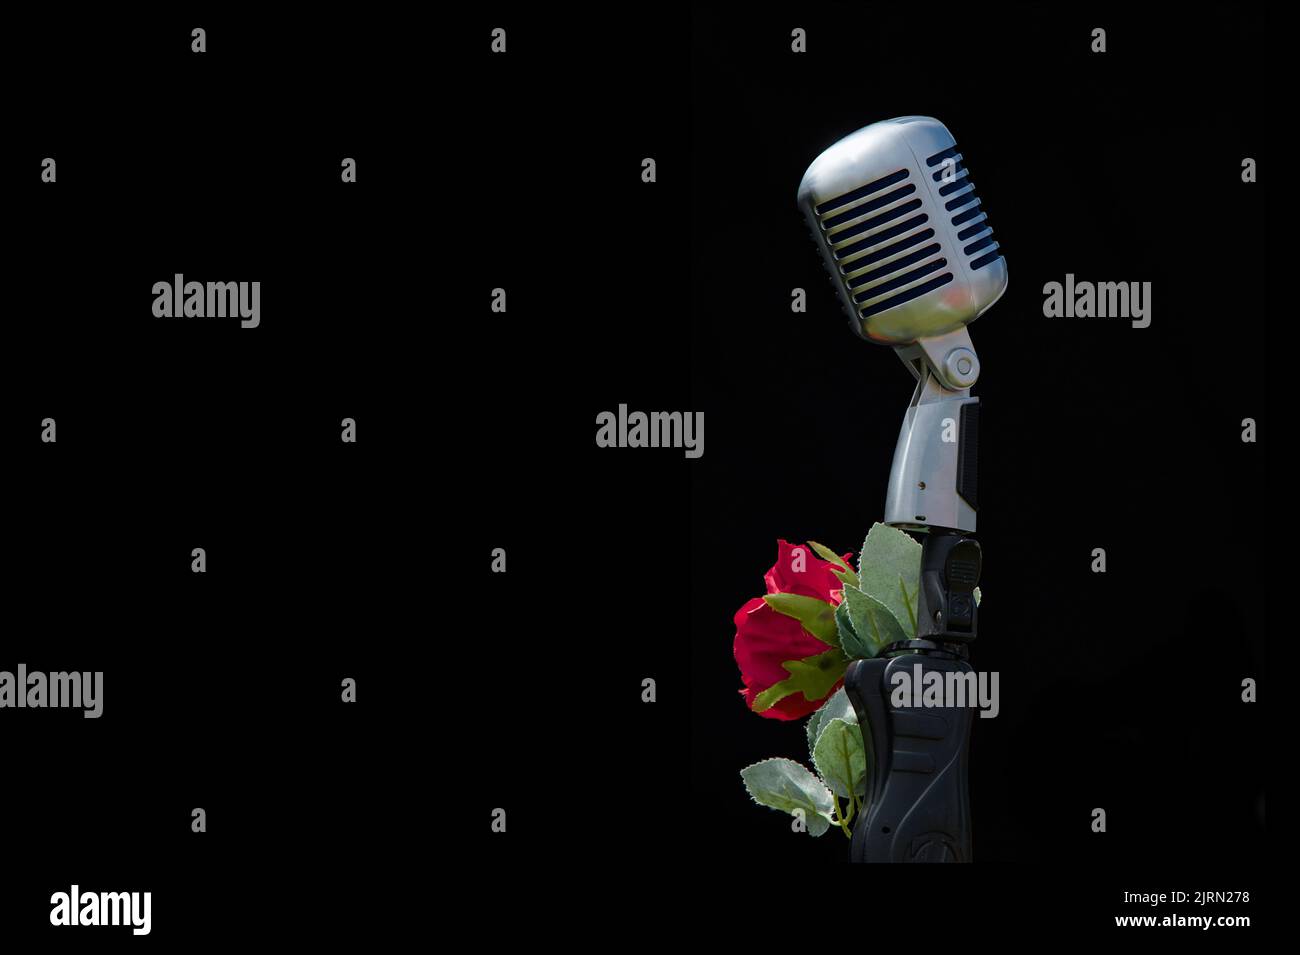 Modern Vintage Looking Microphone With Rose Attached Isolated Against A Black Background, UK Stock Photo